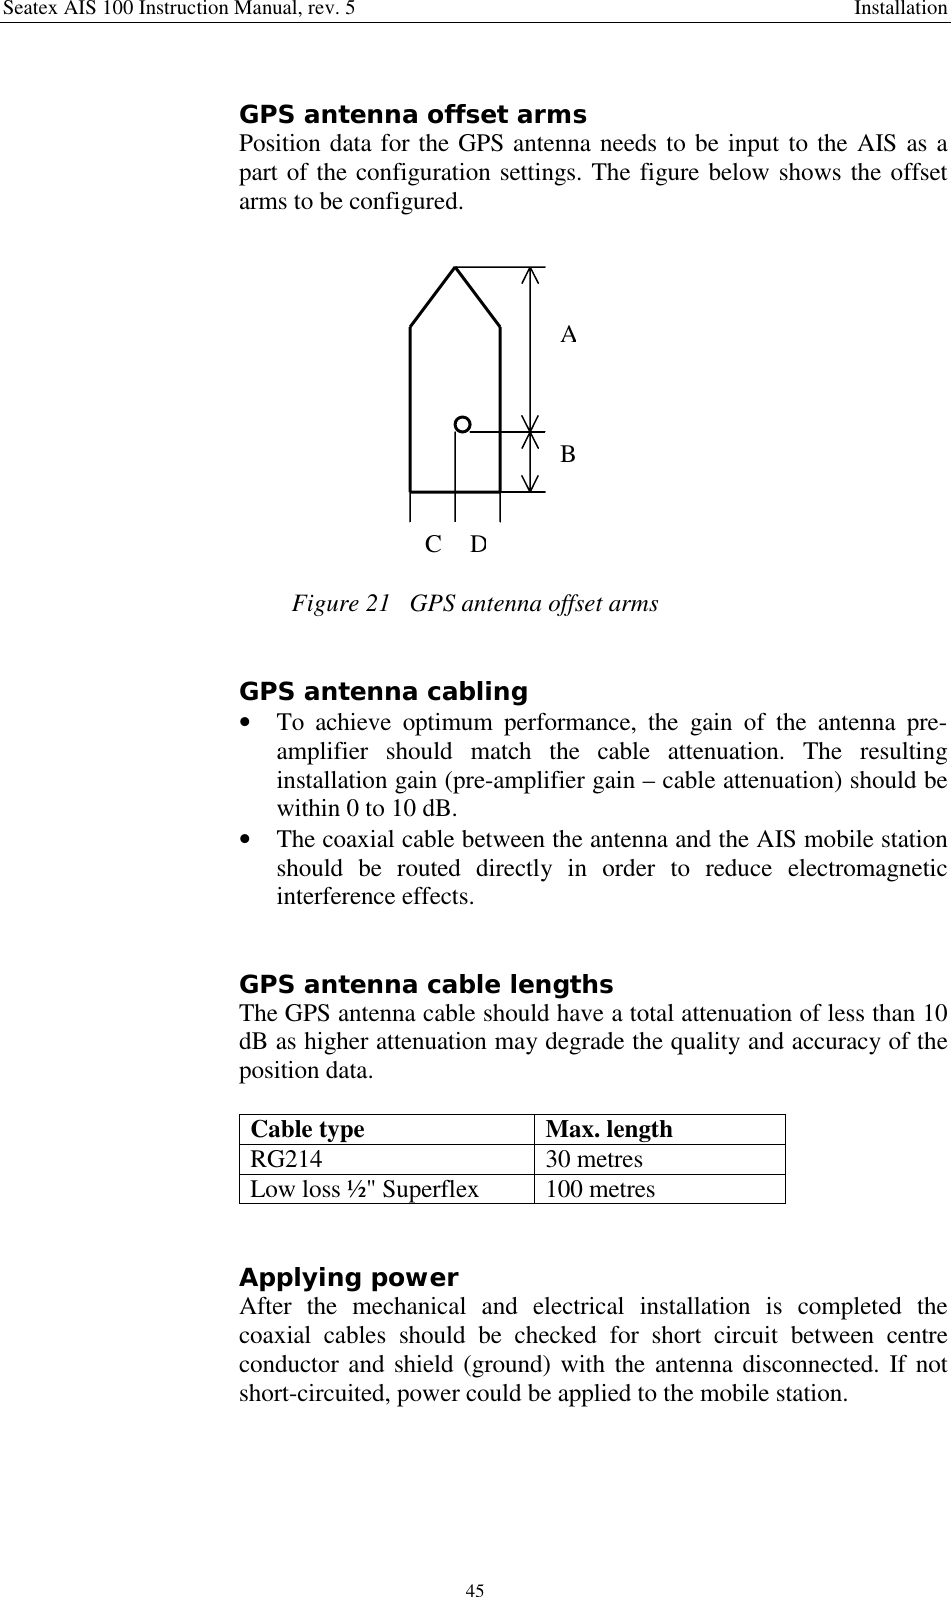 Seatex AIS 100 Instruction Manual, rev. 5 Installation45GPS antenna offset armsPosition data for the GPS antenna needs to be input to the AIS as apart of the configuration settings. The figure below shows the offsetarms to be configured.Figure 21   GPS antenna offset armsGPS antenna cabling• To achieve optimum performance, the gain of the antenna pre-amplifier should match the cable attenuation. The resultinginstallation gain (pre-amplifier gain – cable attenuation) should bewithin 0 to 10 dB.• The coaxial cable between the antenna and the AIS mobile stationshould be routed directly in order to reduce electromagneticinterference effects.GPS antenna cable lengthsThe GPS antenna cable should have a total attenuation of less than 10dB as higher attenuation may degrade the quality and accuracy of theposition data.Cable type Max. lengthRG214 30 metresLow loss ½&quot; Superflex 100 metresApplying powerAfter the mechanical and electrical installation is completed thecoaxial cables should be checked for short circuit between centreconductor and shield (ground) with the antenna disconnected. If notshort-circuited, power could be applied to the mobile station.ABCD